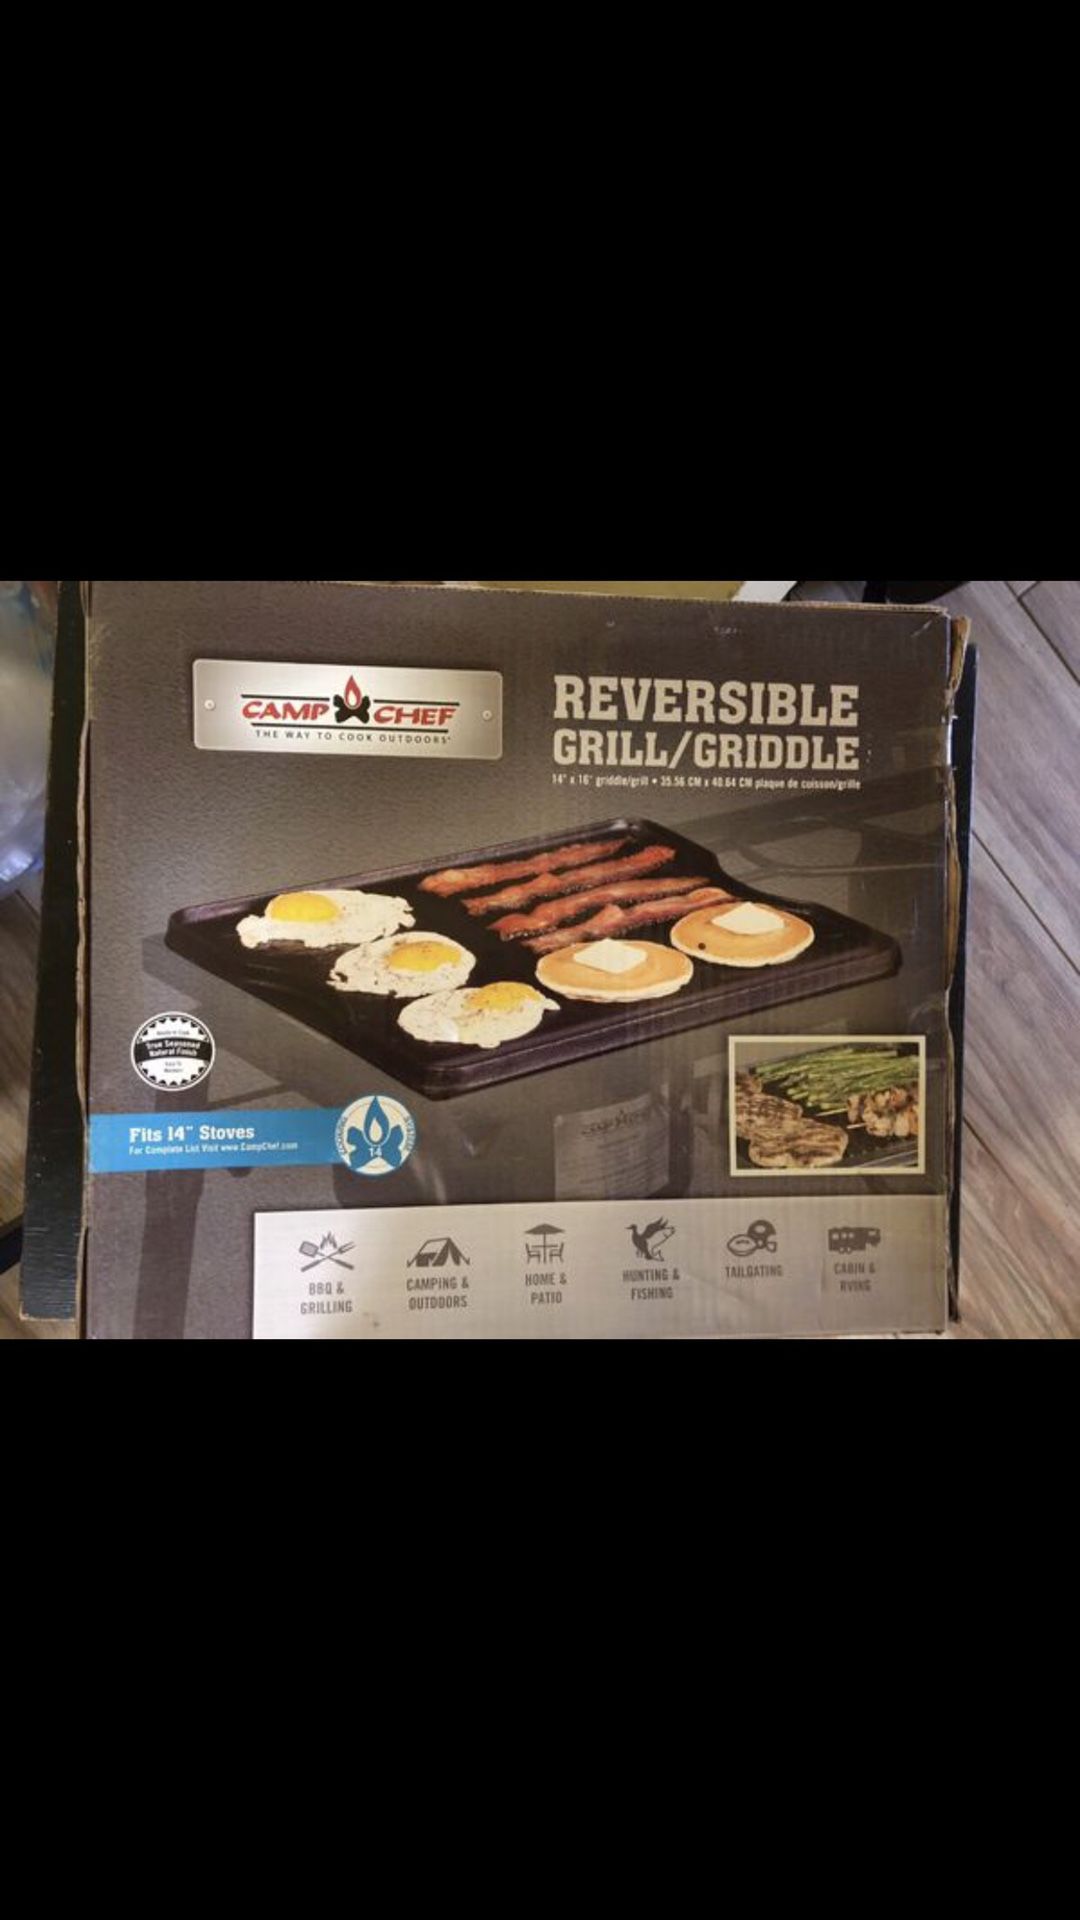 Reversible Grill 50$ or OBO